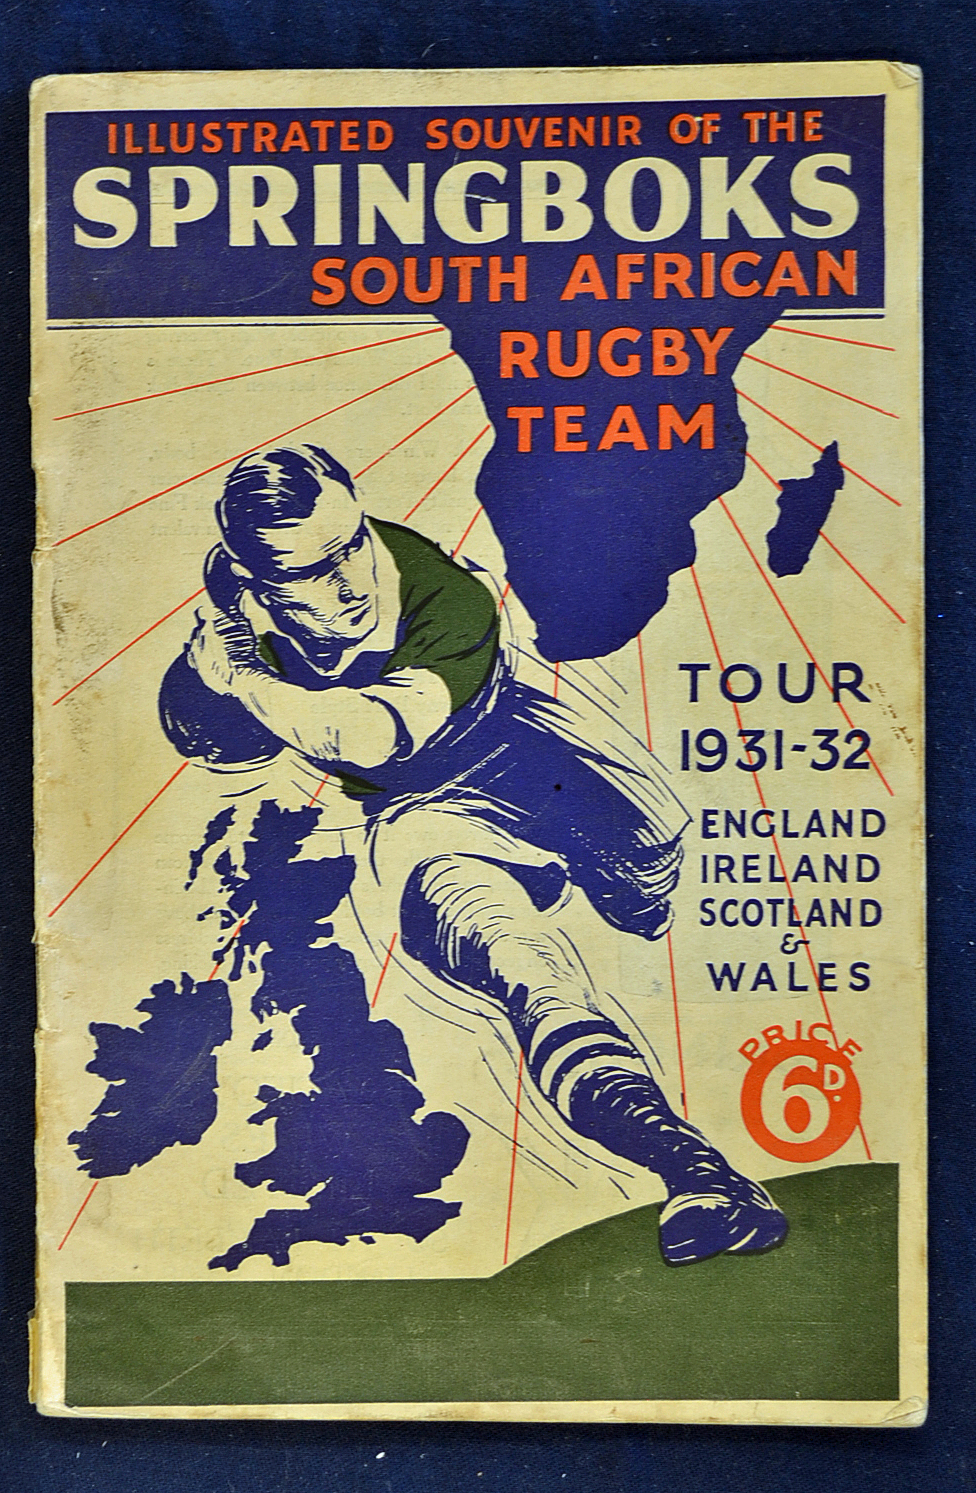 1931/32 South African Springboks Illustrated Souvenir programme of the tour to England, Ireland - Image 2 of 2